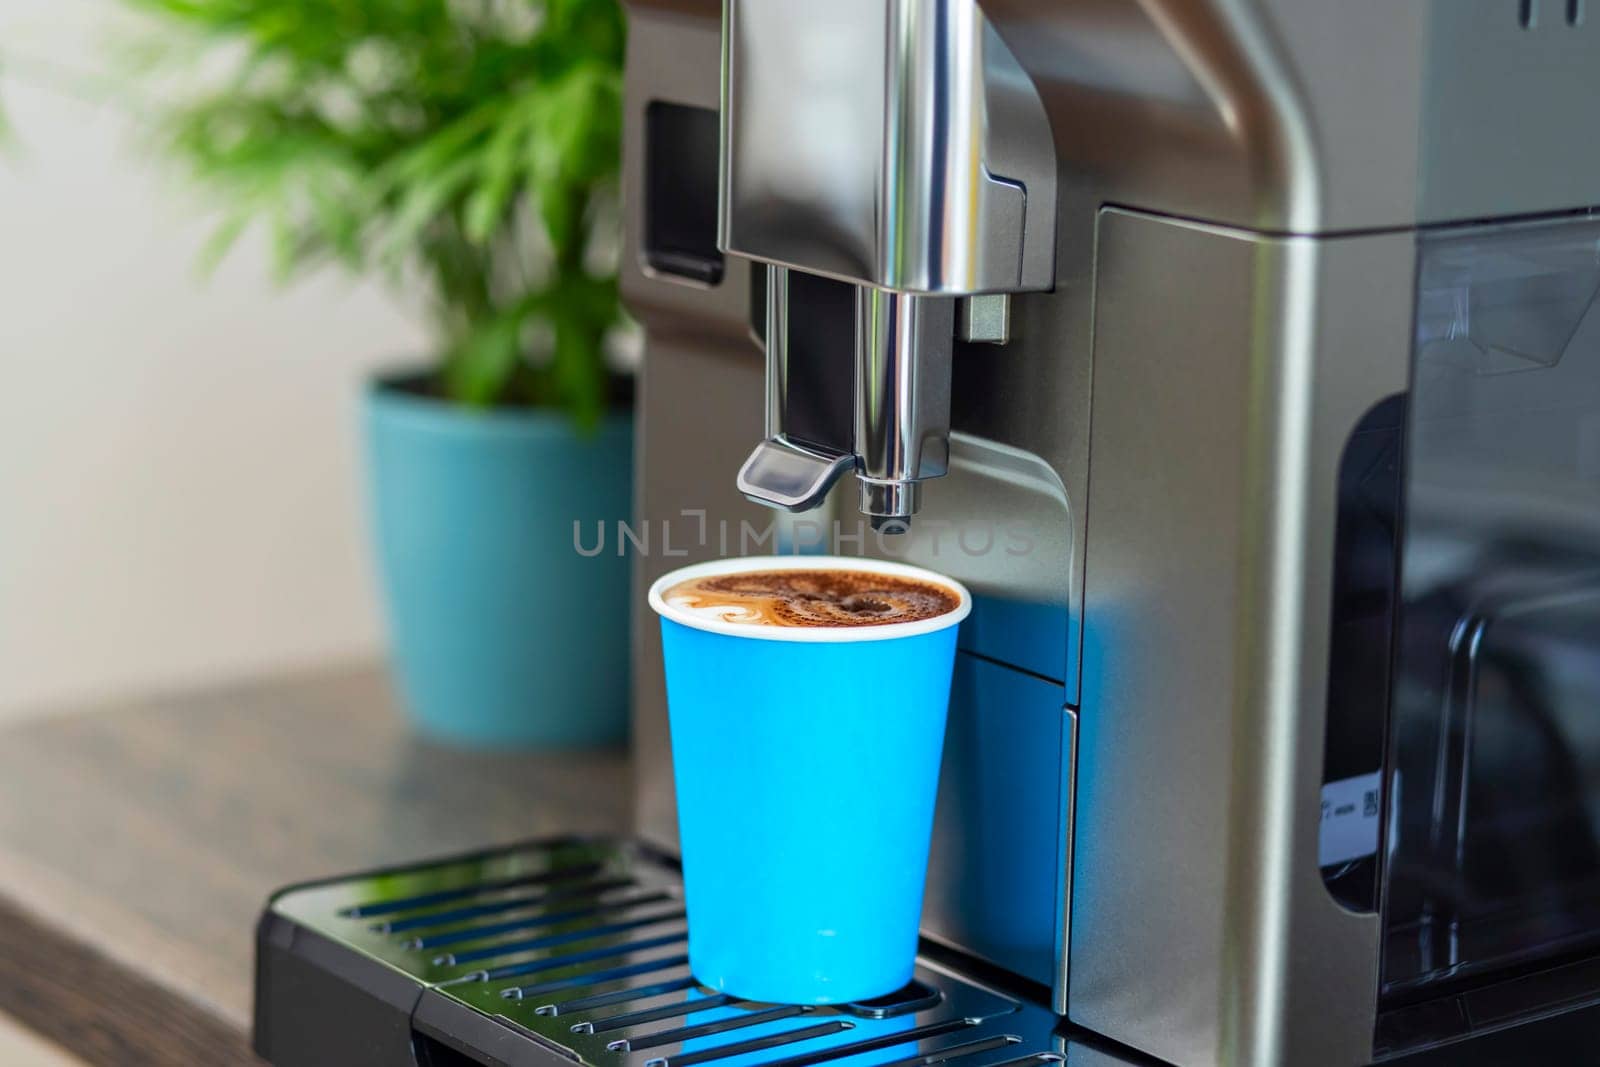 Close-up view of an automatic espresso machine serving fresh coffee in a vibrant blue cup, placed on a kitchen counter.